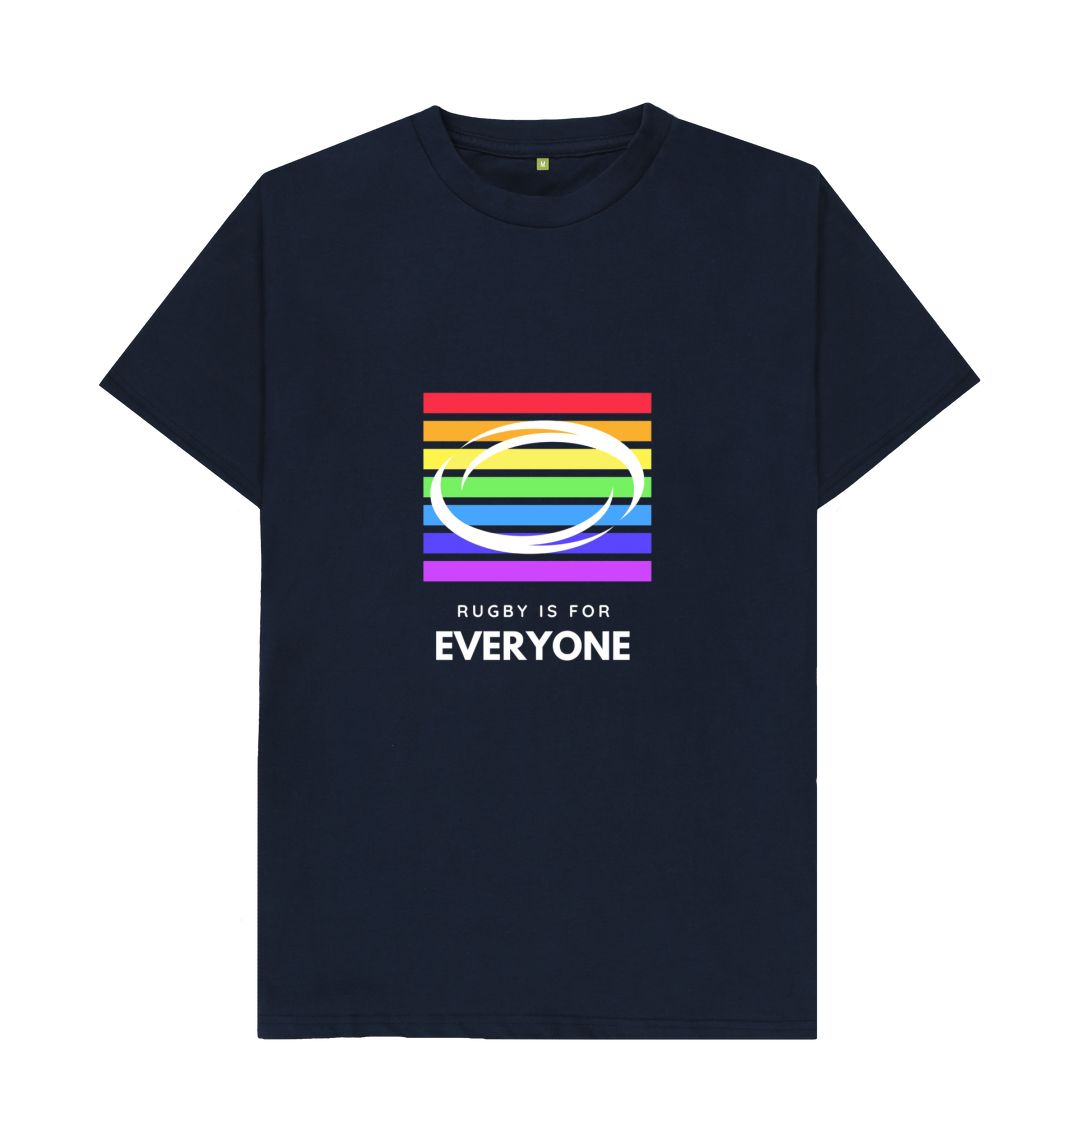 Navy Blue Adults T-Shirt - Rugby is for everyone